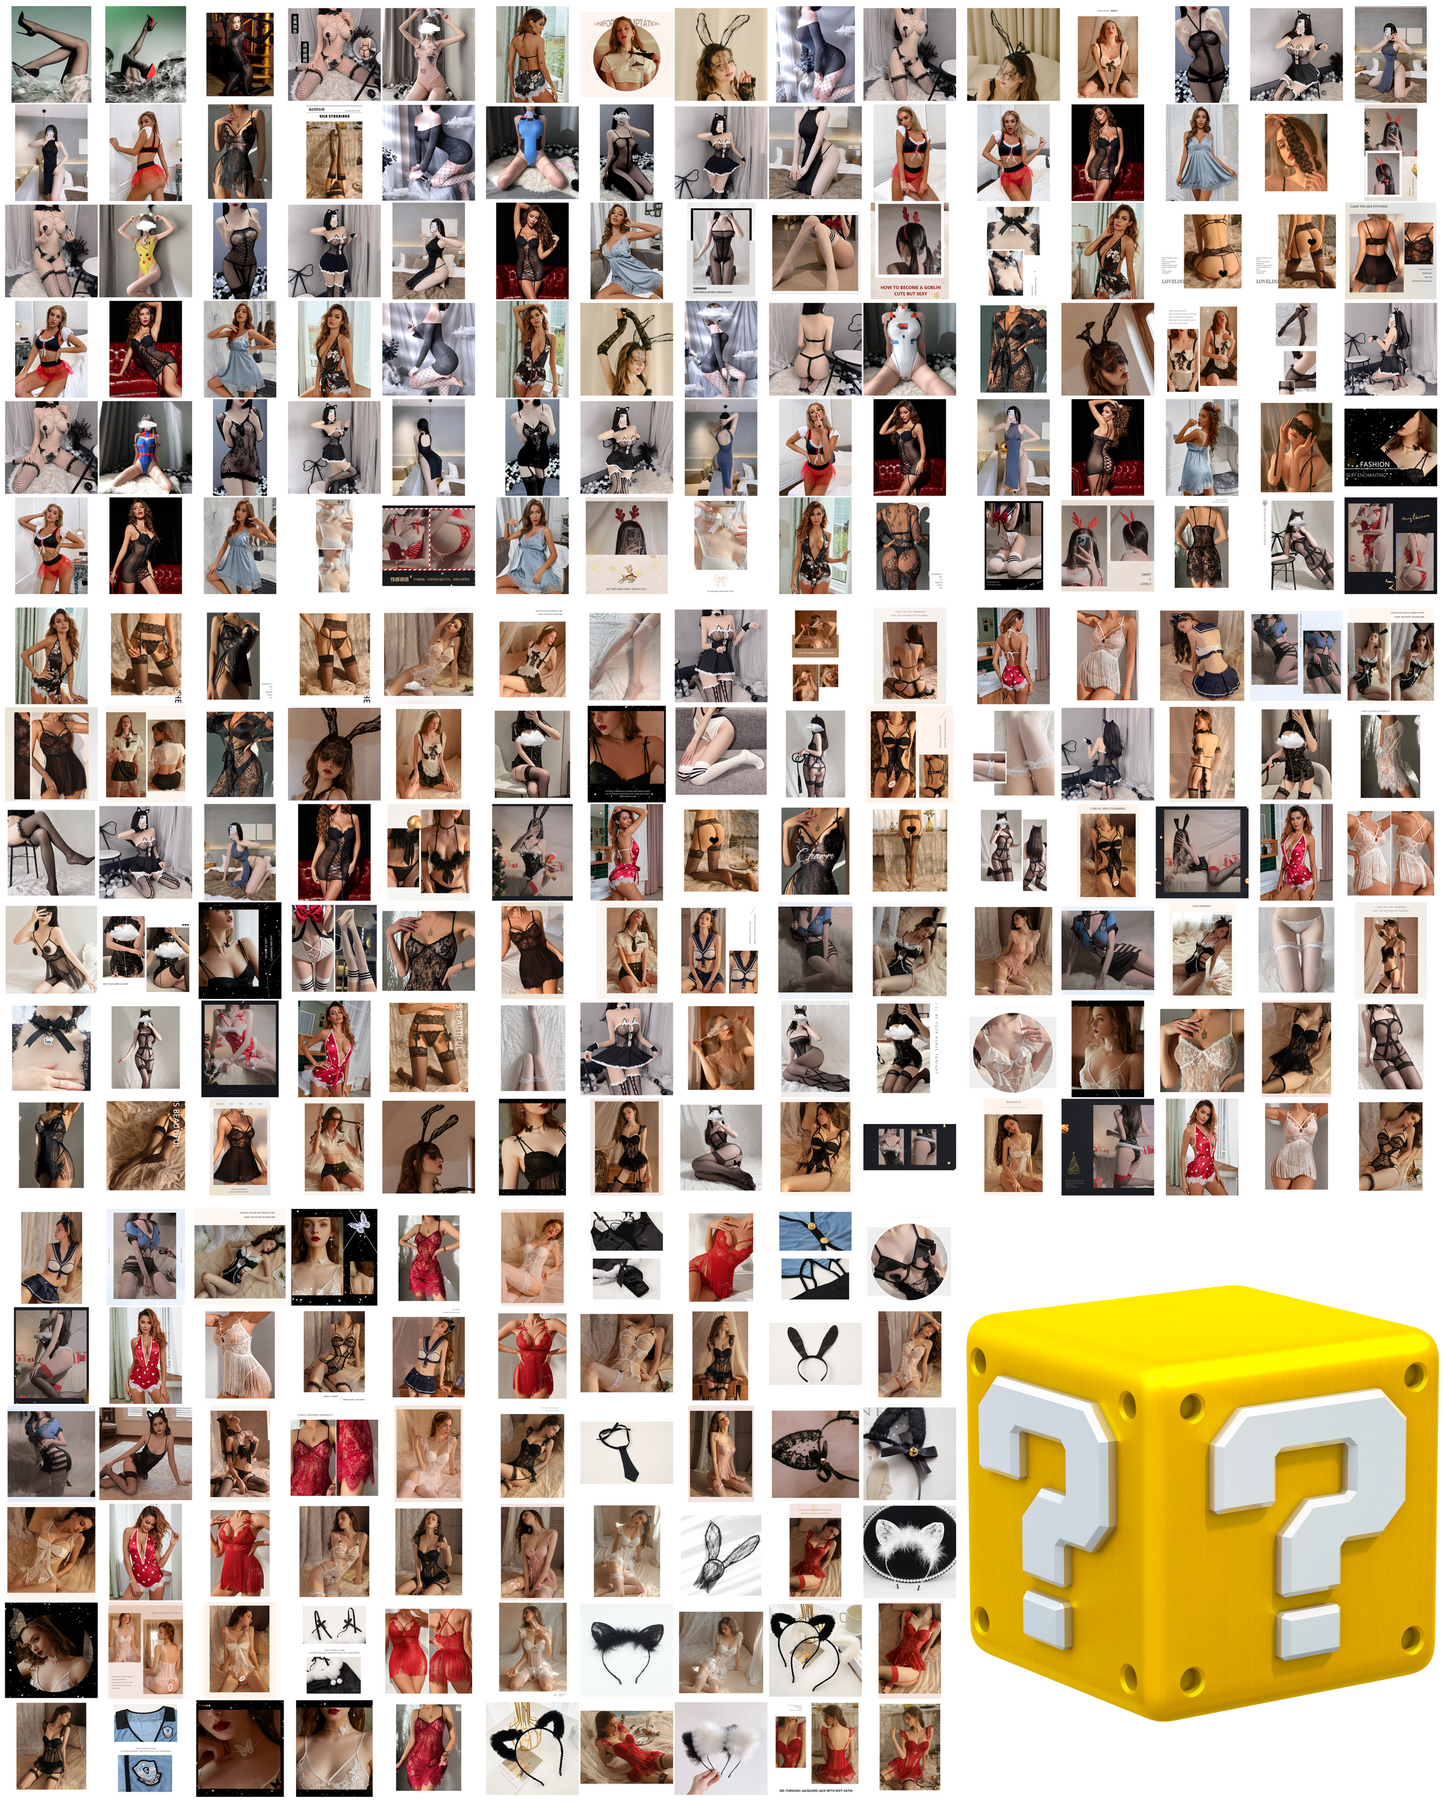 Up to 95% Off ! $2.00 Each ! Sexy lingerie blind box for 15/20/36 pieces!